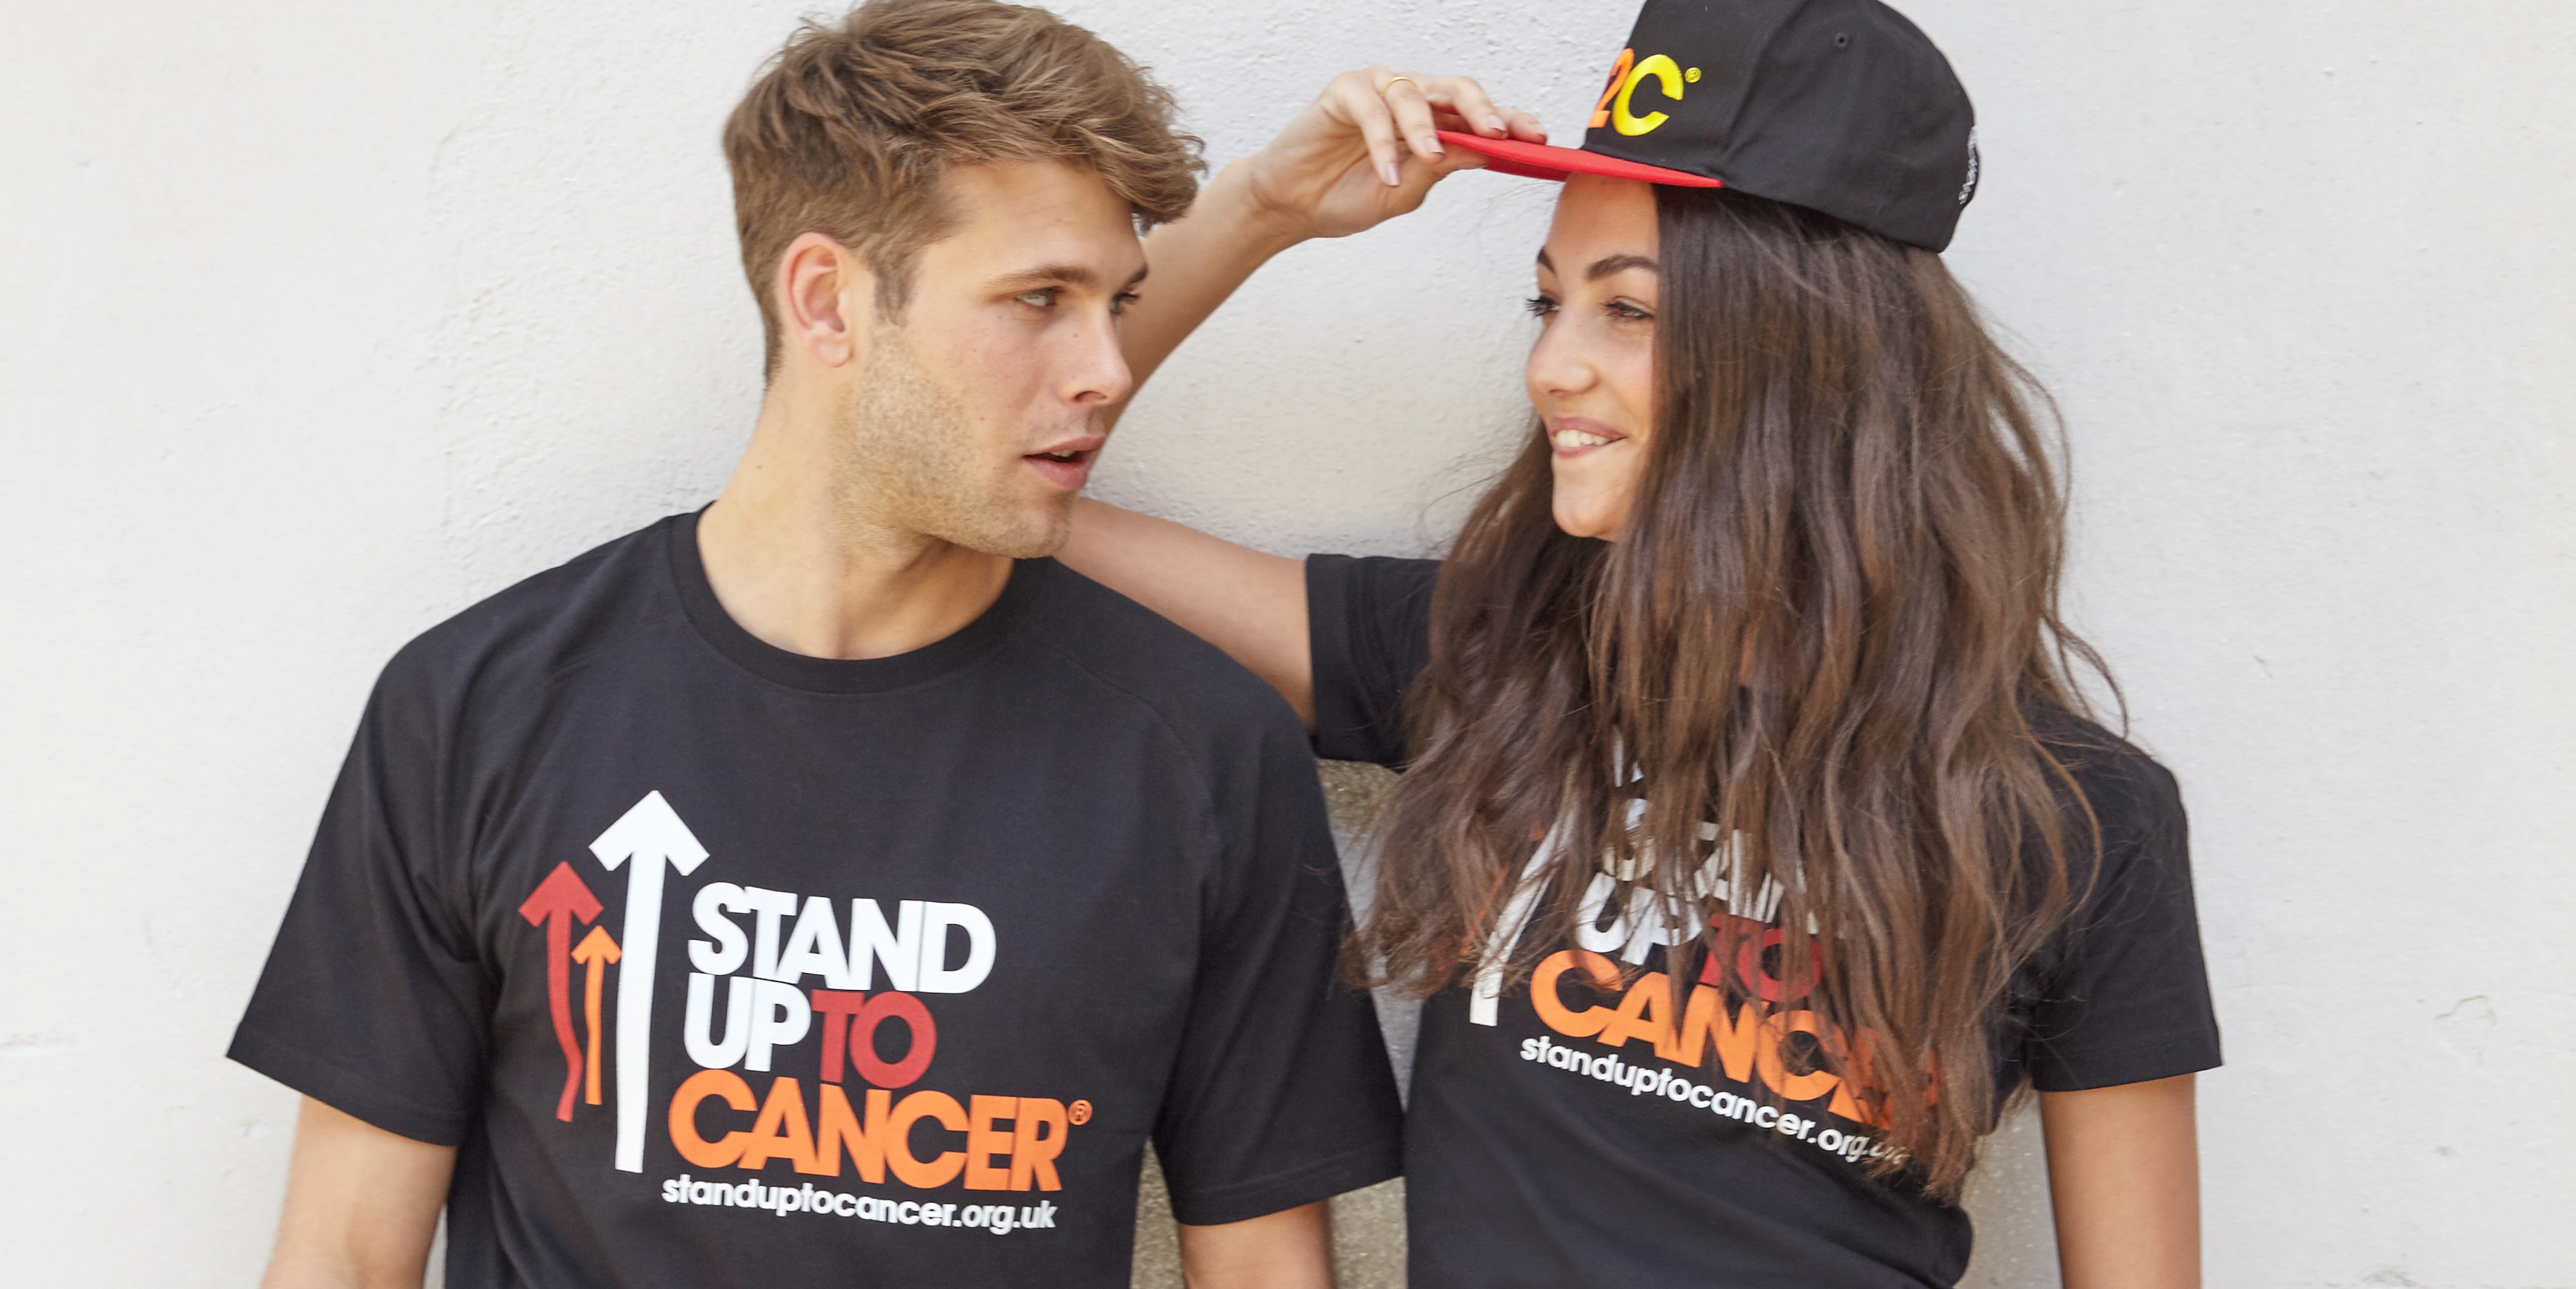 Artists Stand Up To Cancer Wallpaper Background Image